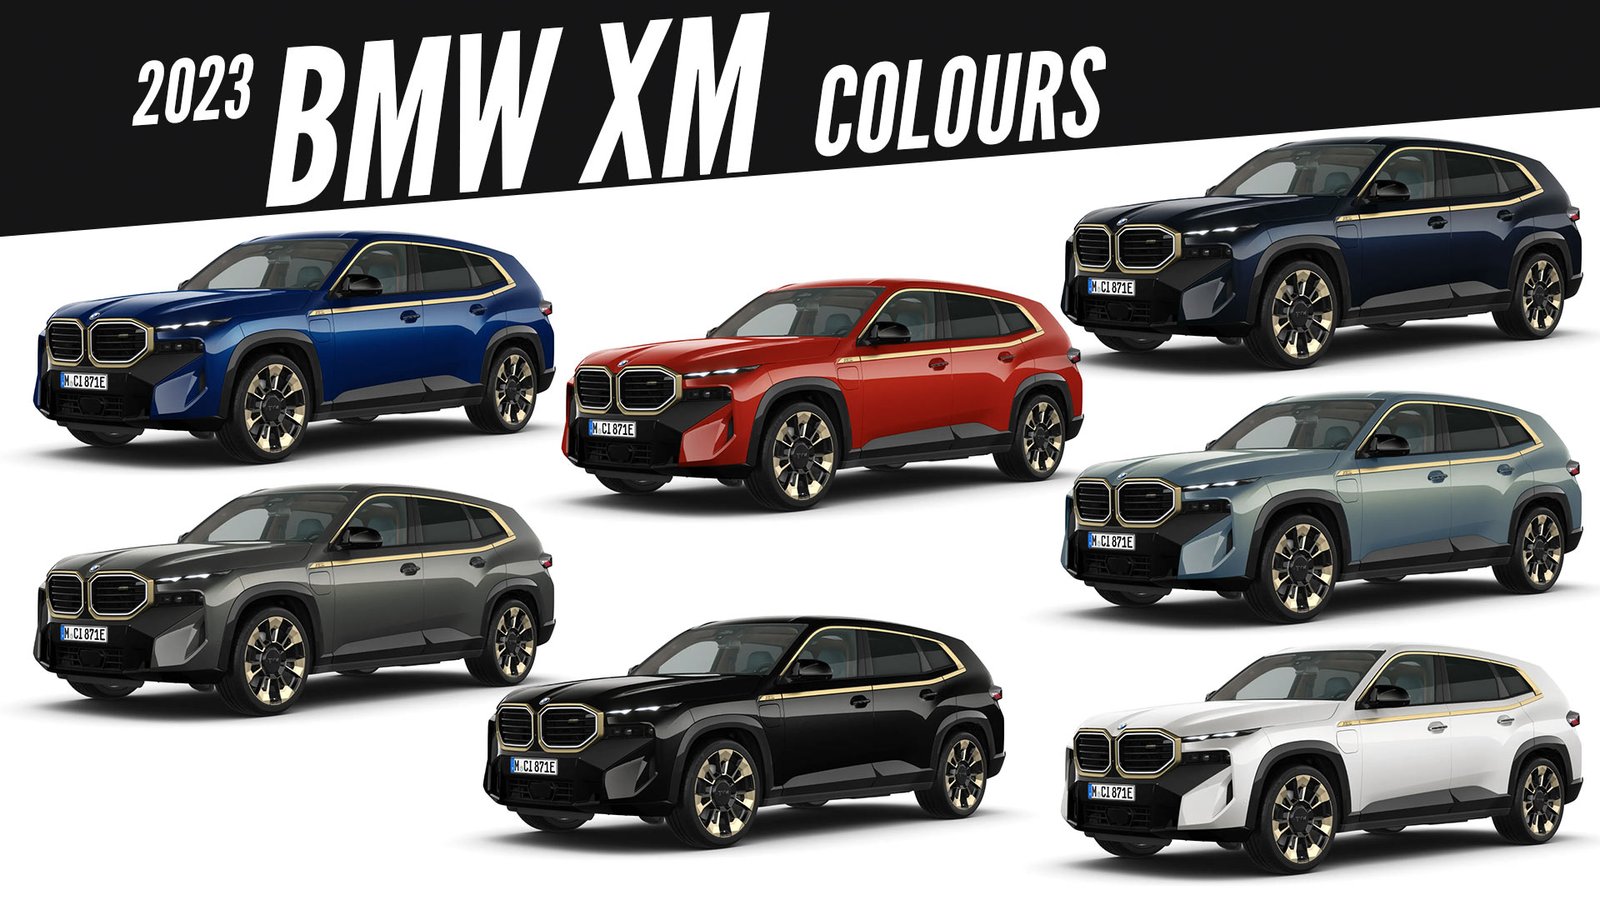 2023 BMW XM All Color Options 